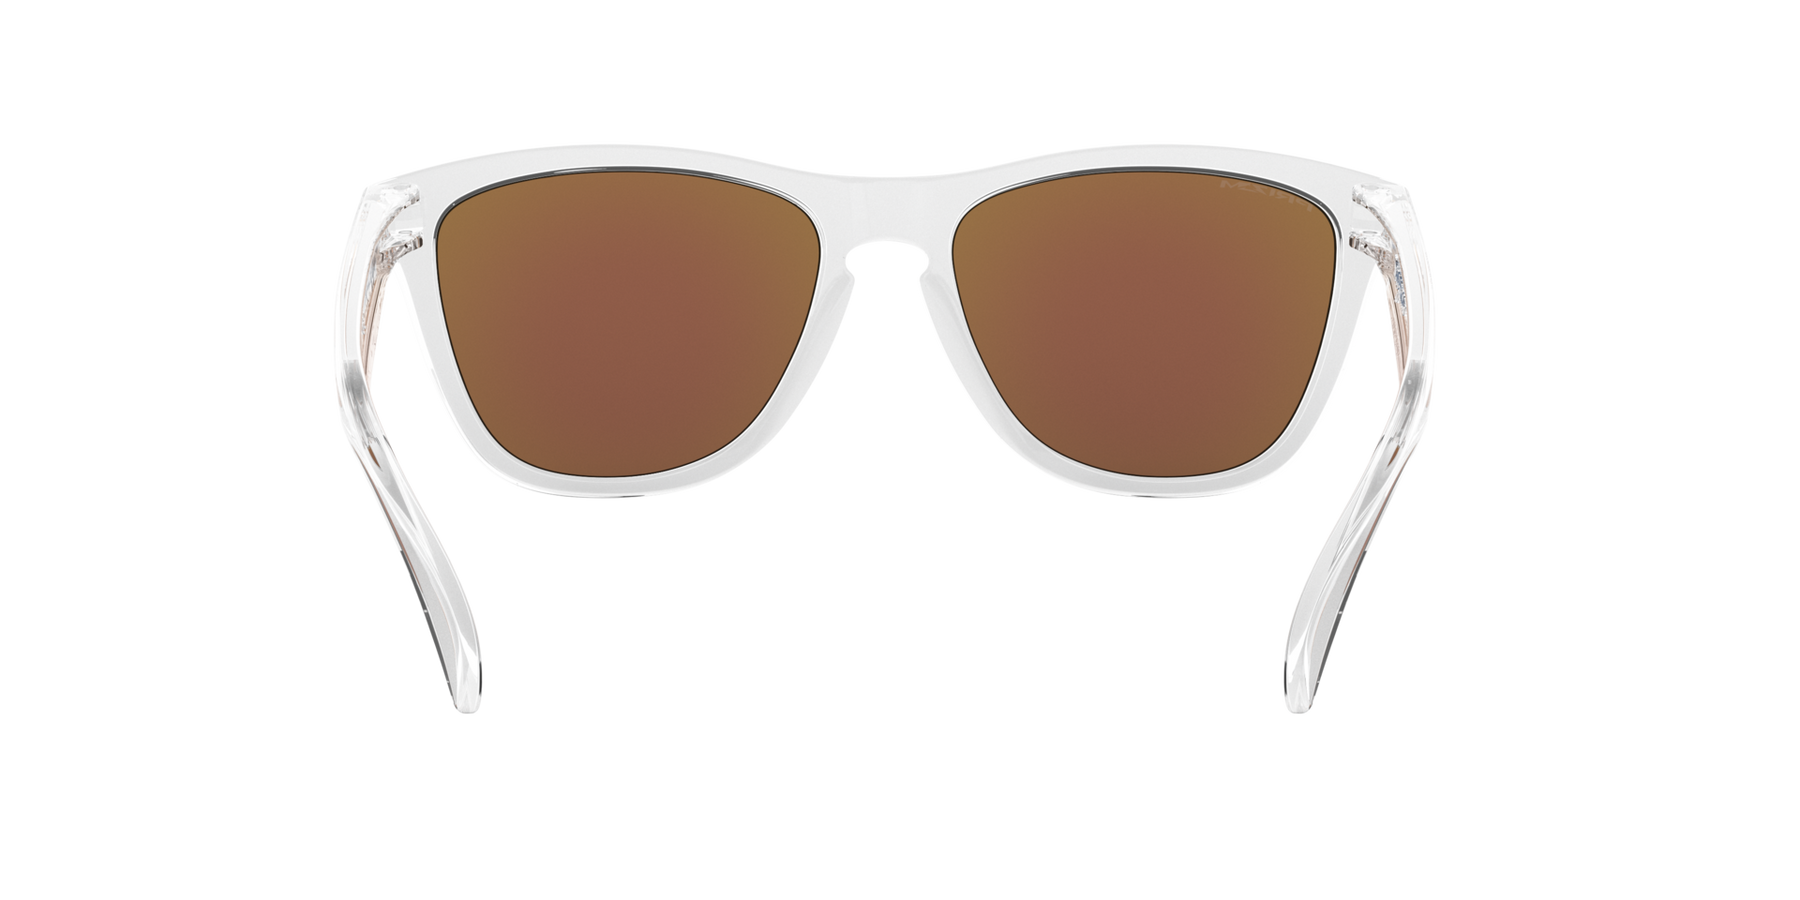 Frogskins - Crystal Clear - Prizm Sapphire